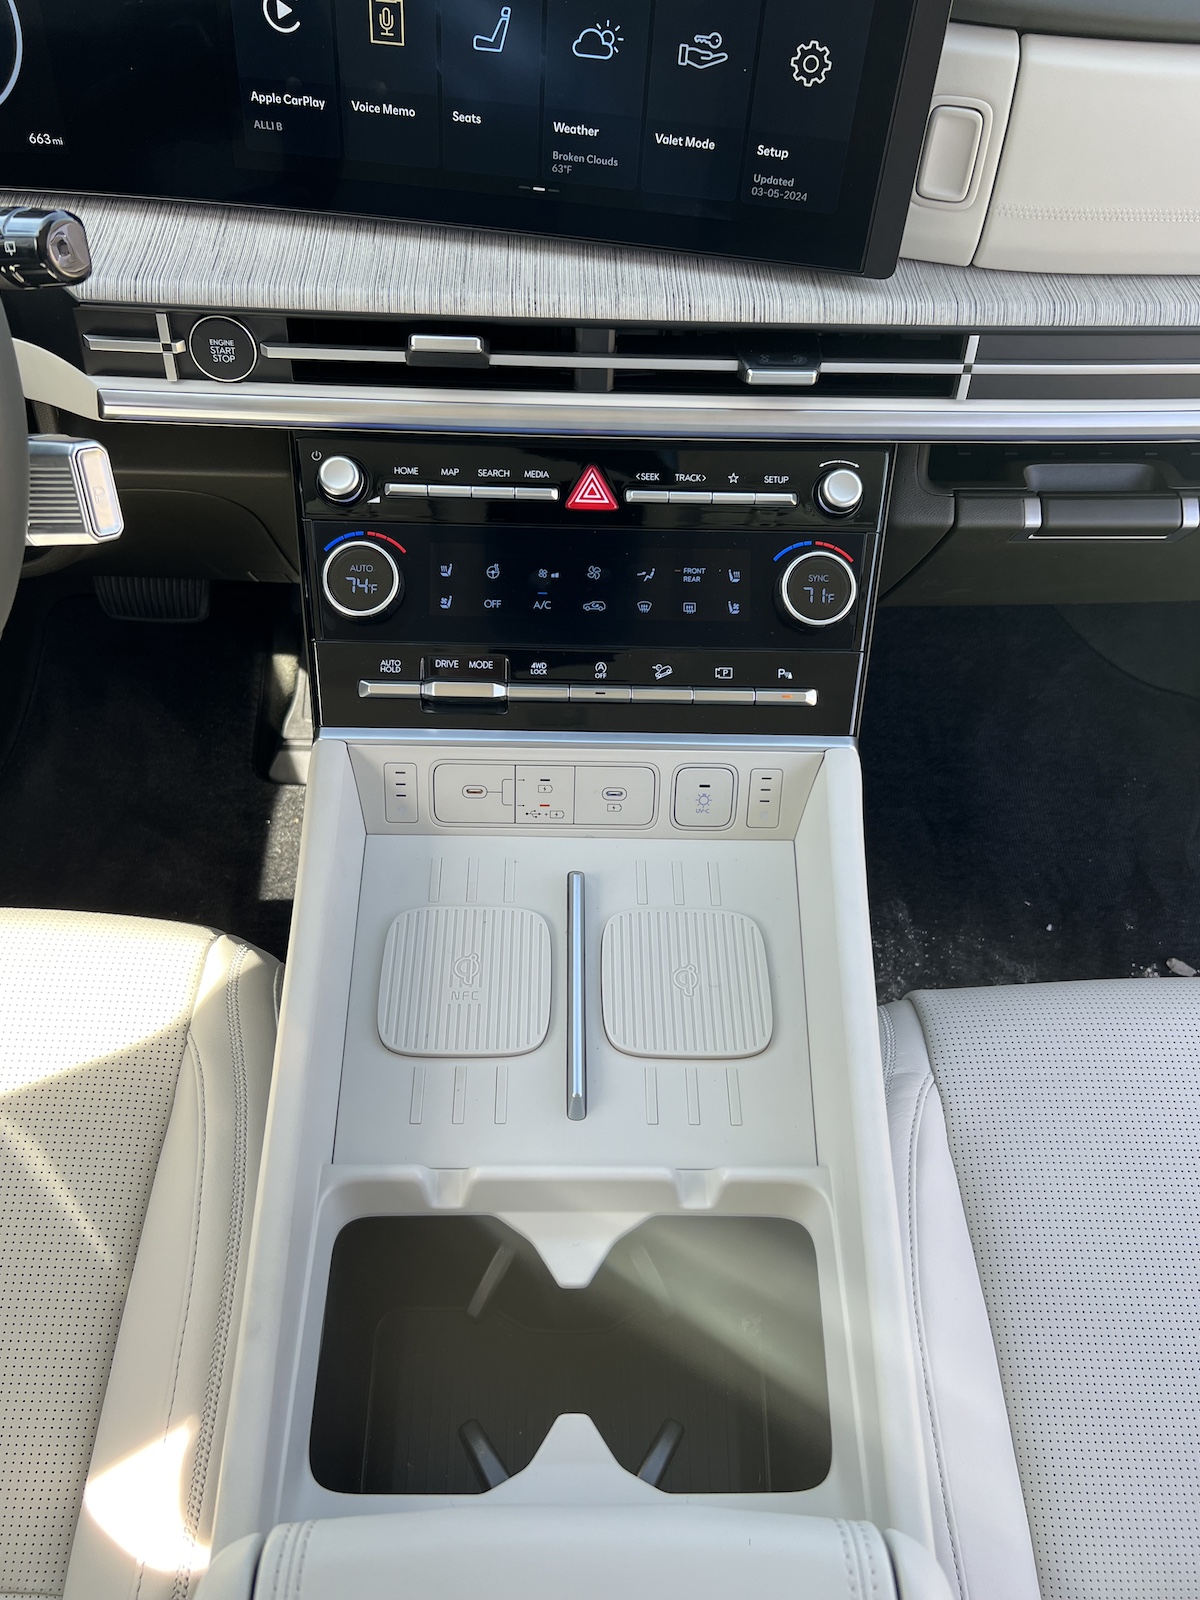 The Center Console Has Dual Wireless Charge Pads, Charge Ports And Cupholders